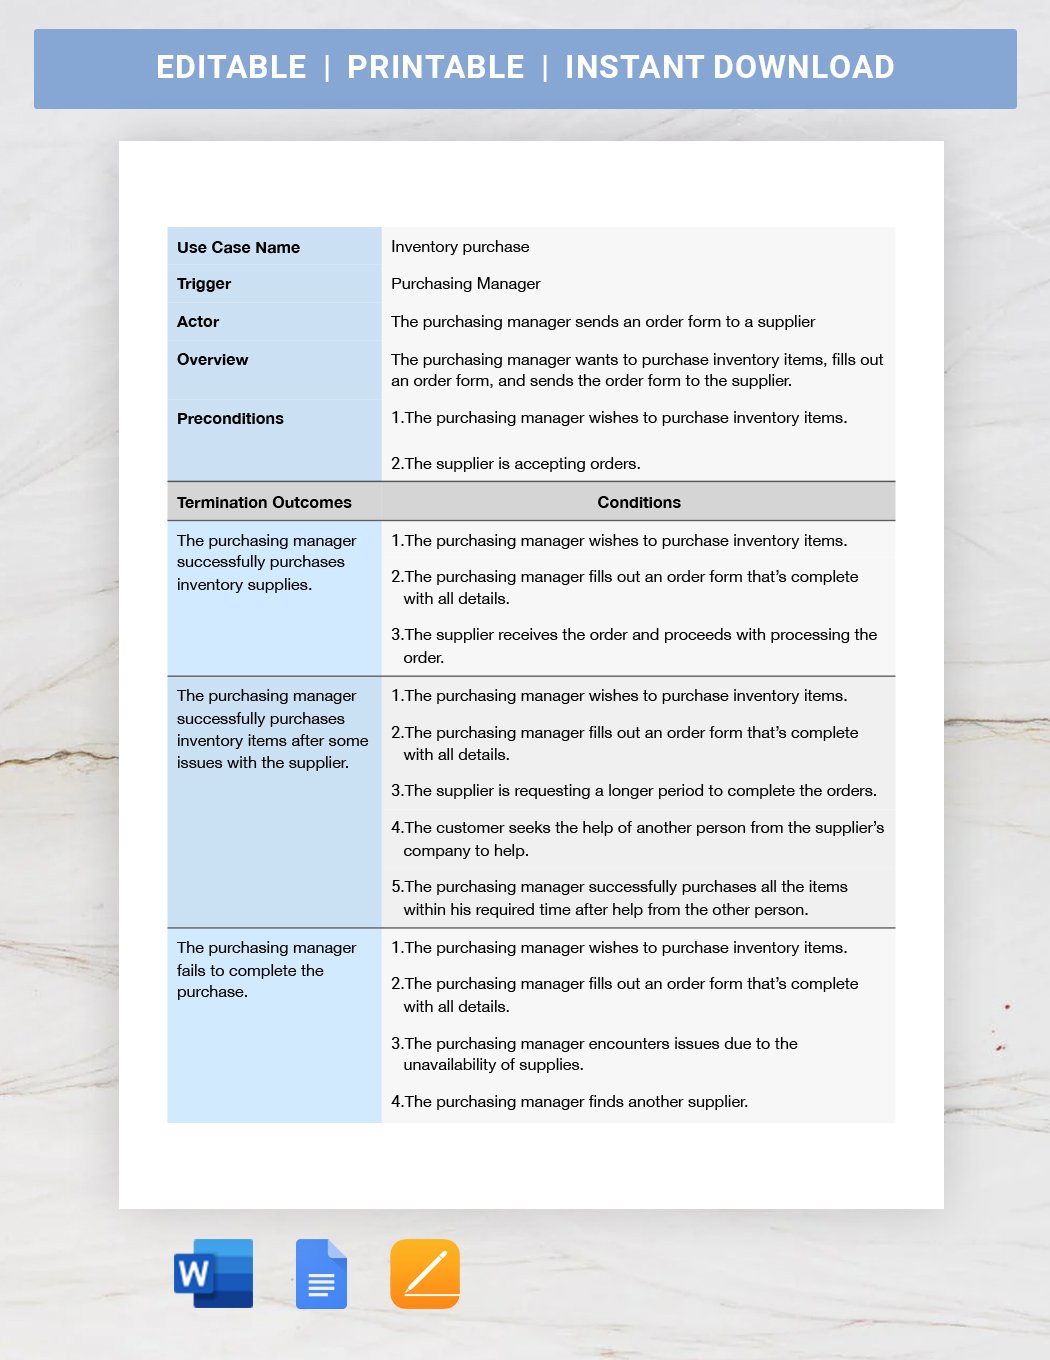 FREE Use Case Templates Examples Edit Online Download Template net